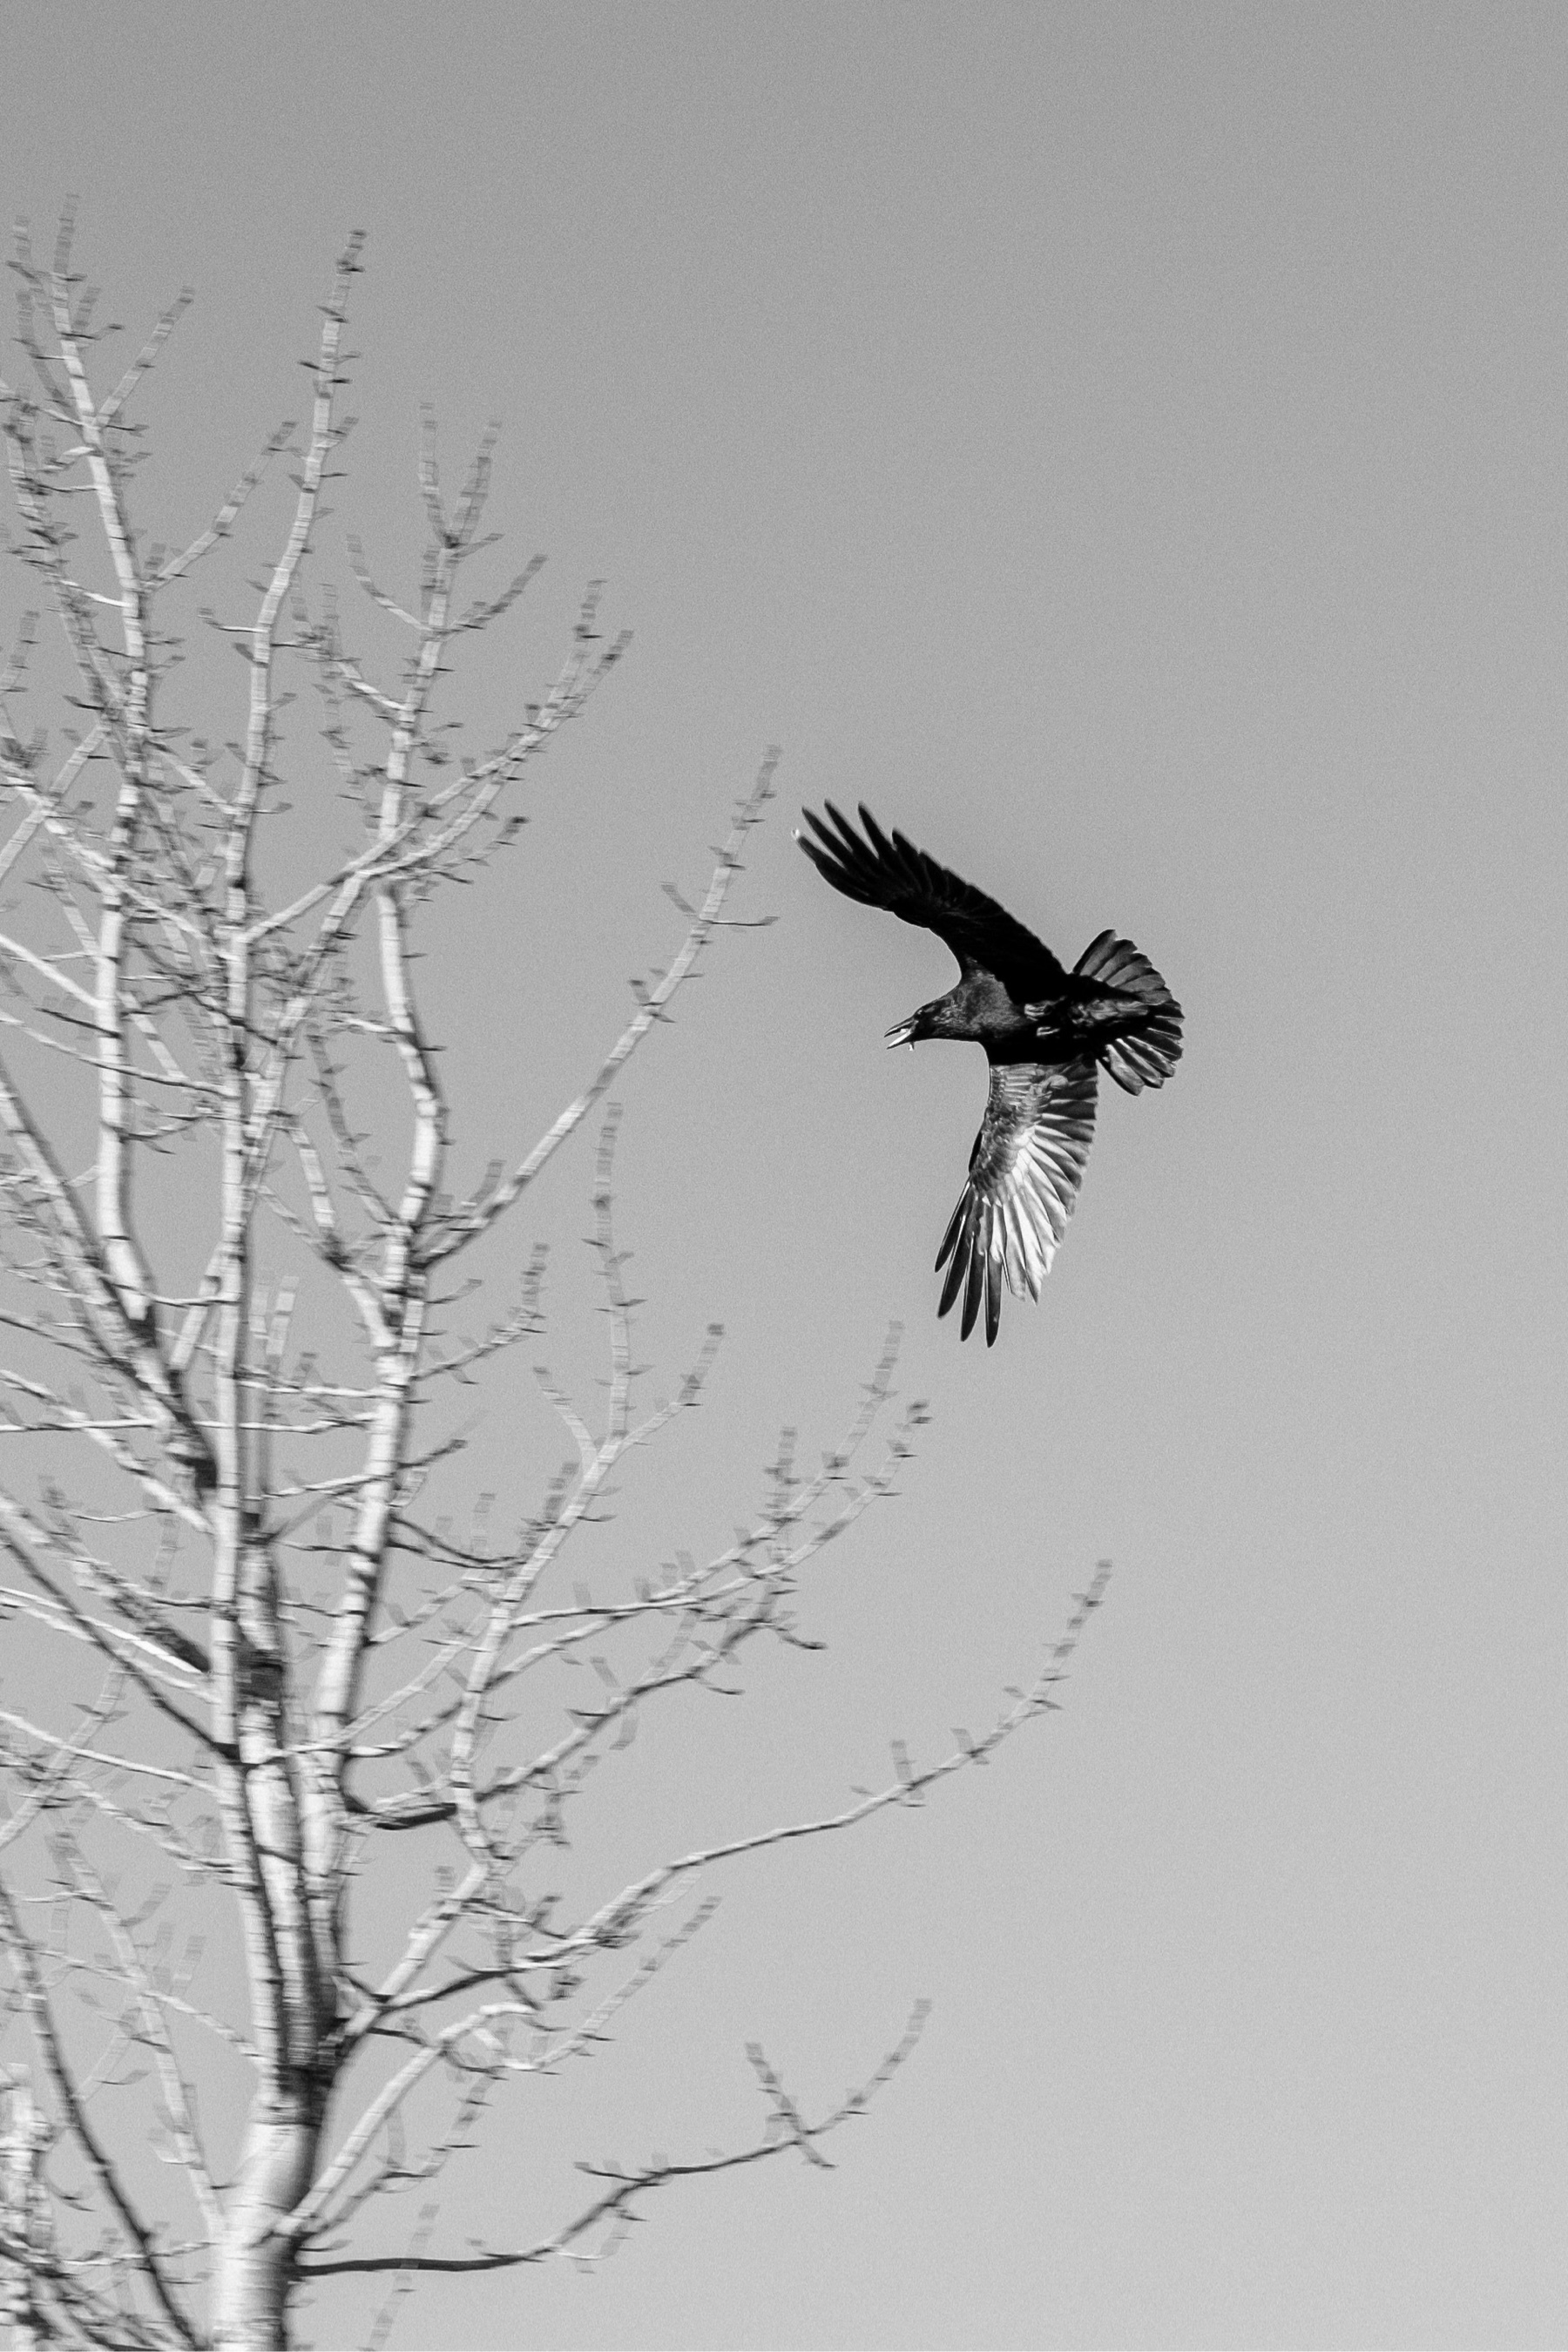 A raven flies with something in its beak